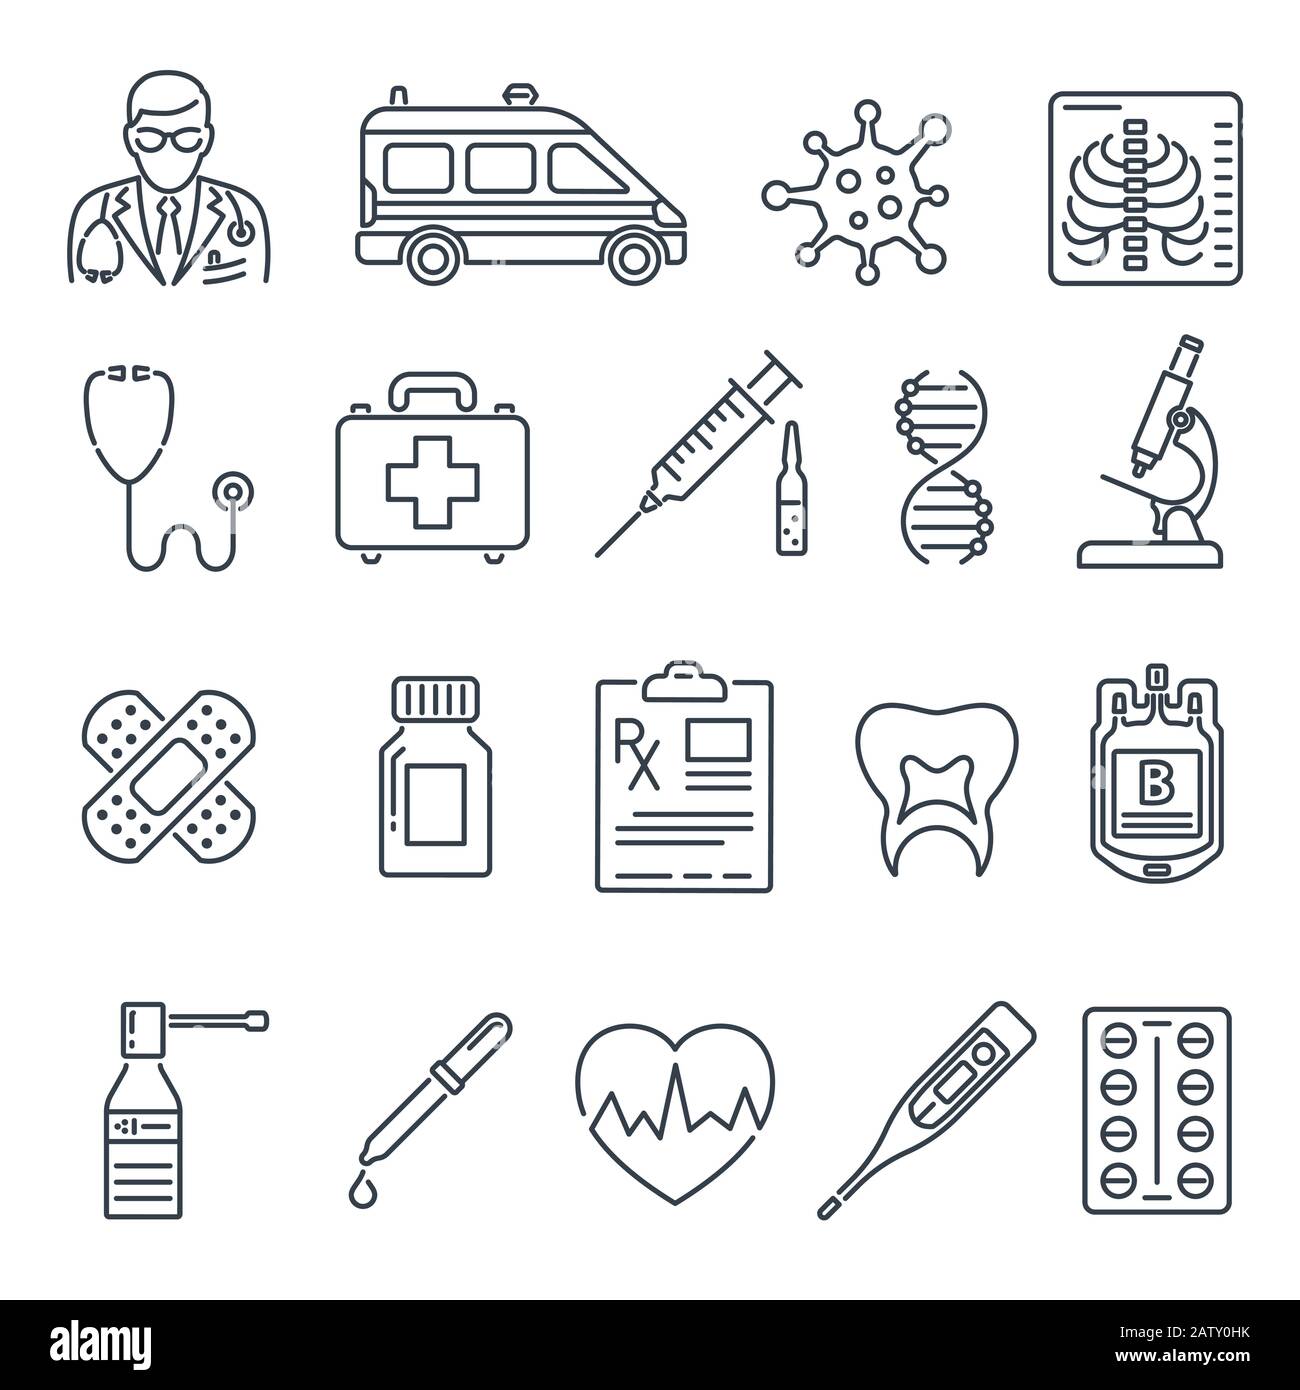 Medical Healthcare Line Icons Set Stock Vector